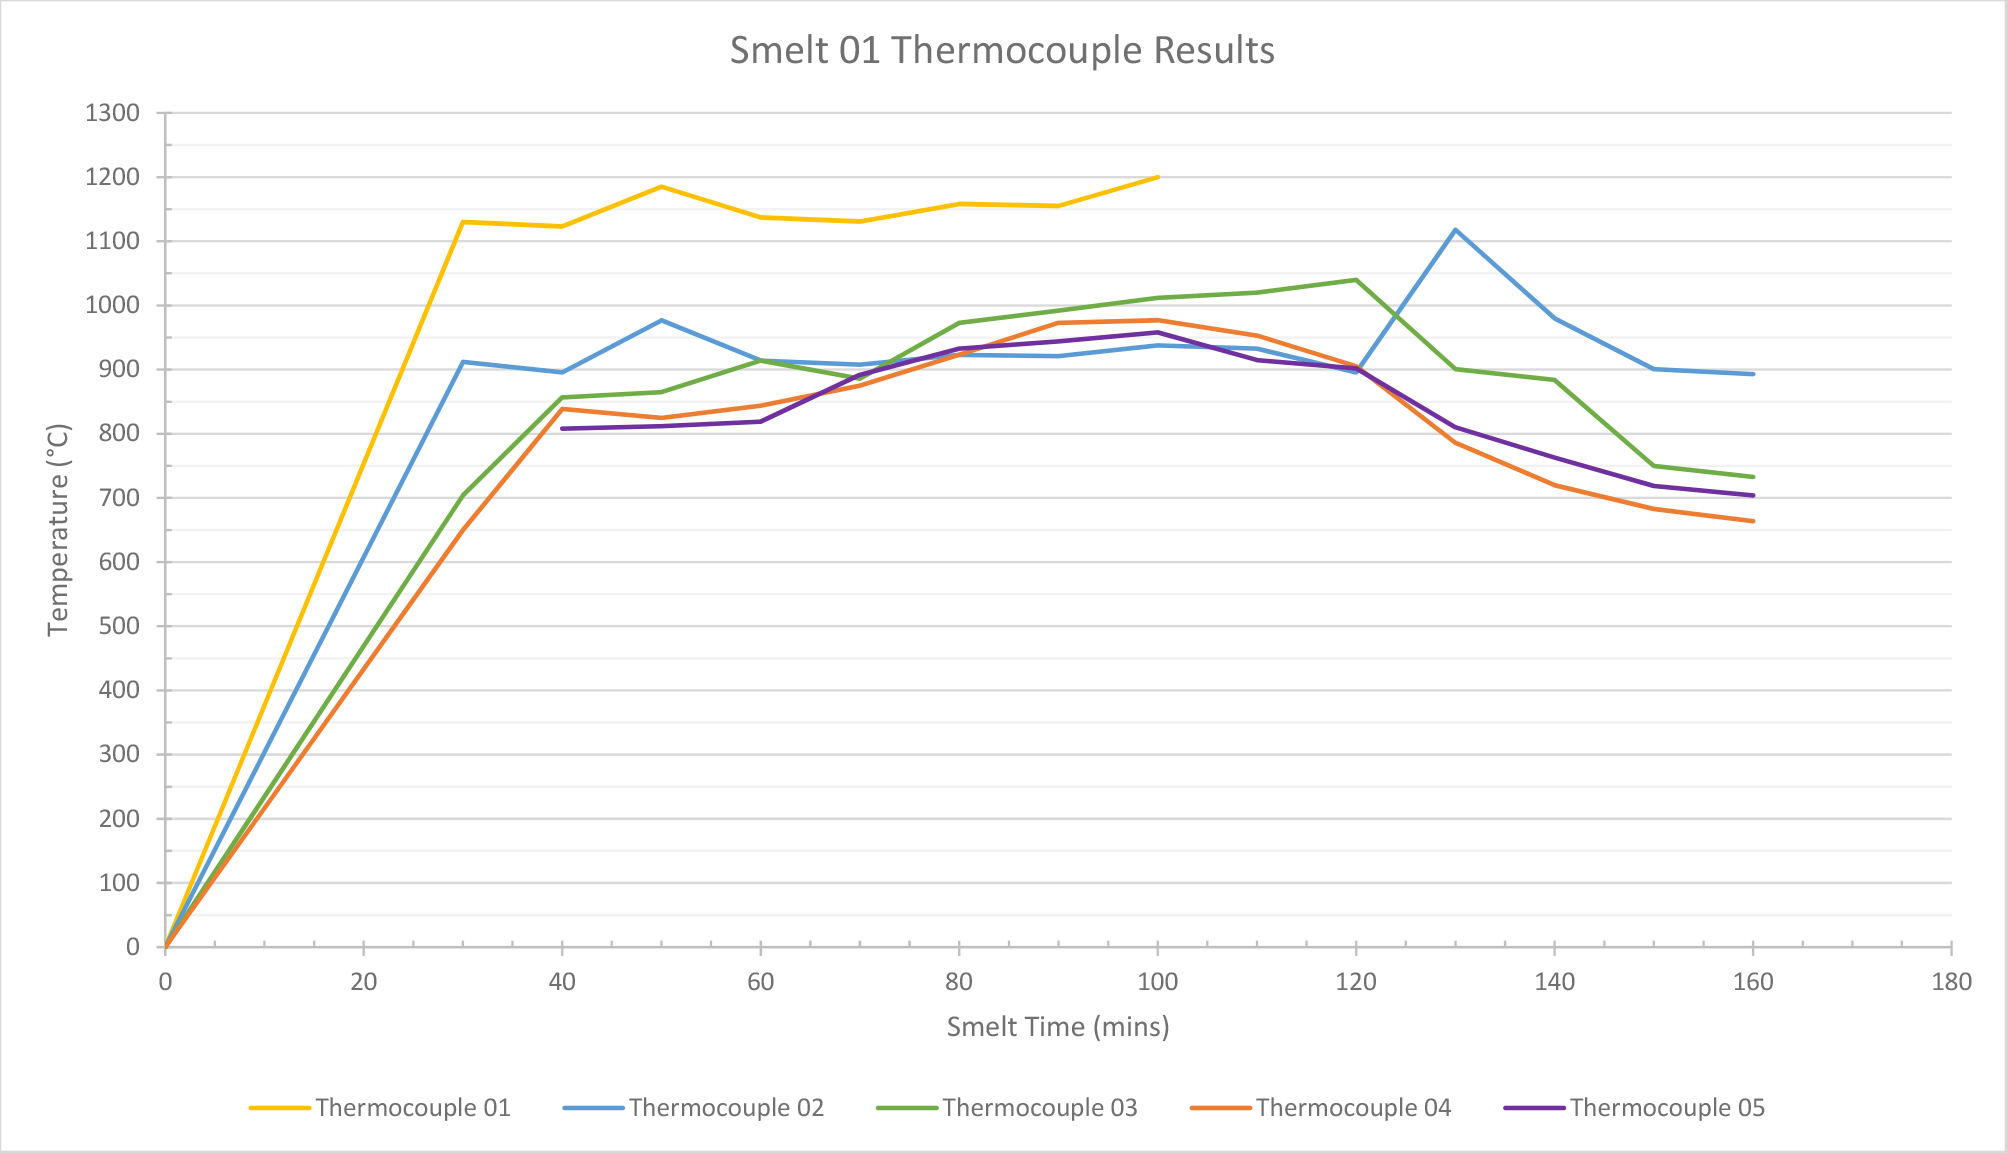 Graph 1. Smelt 1 data: Graph showing temperature readings from thermocouples. 